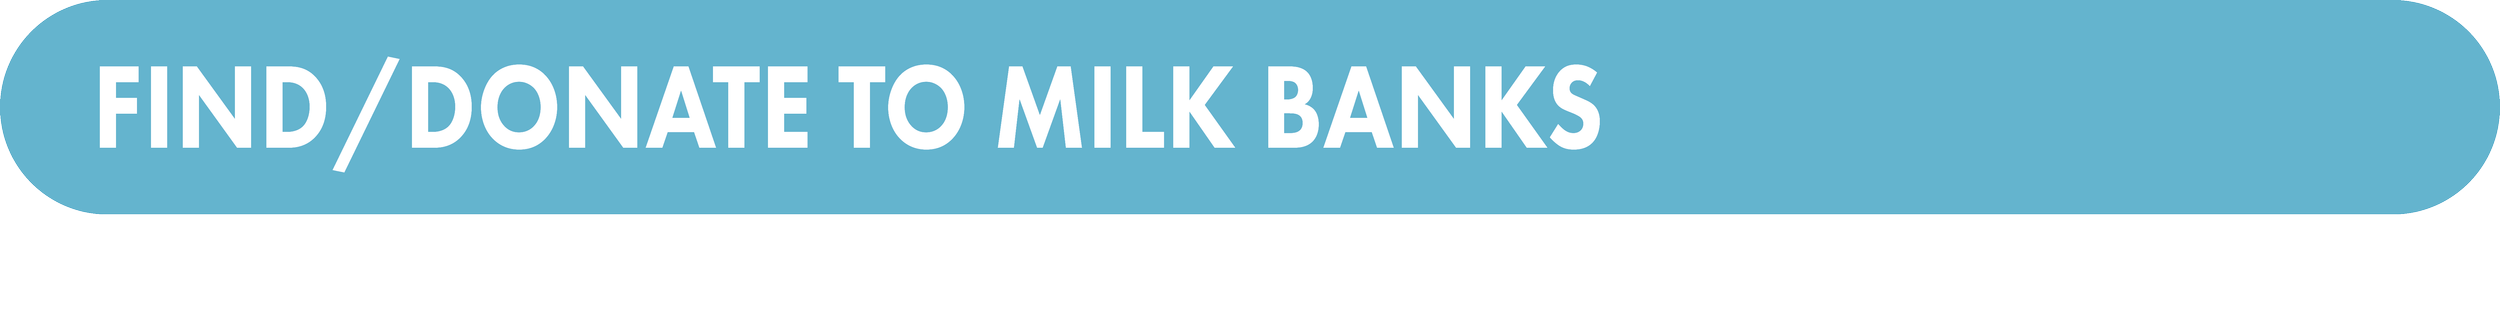 teal milk bank button.png